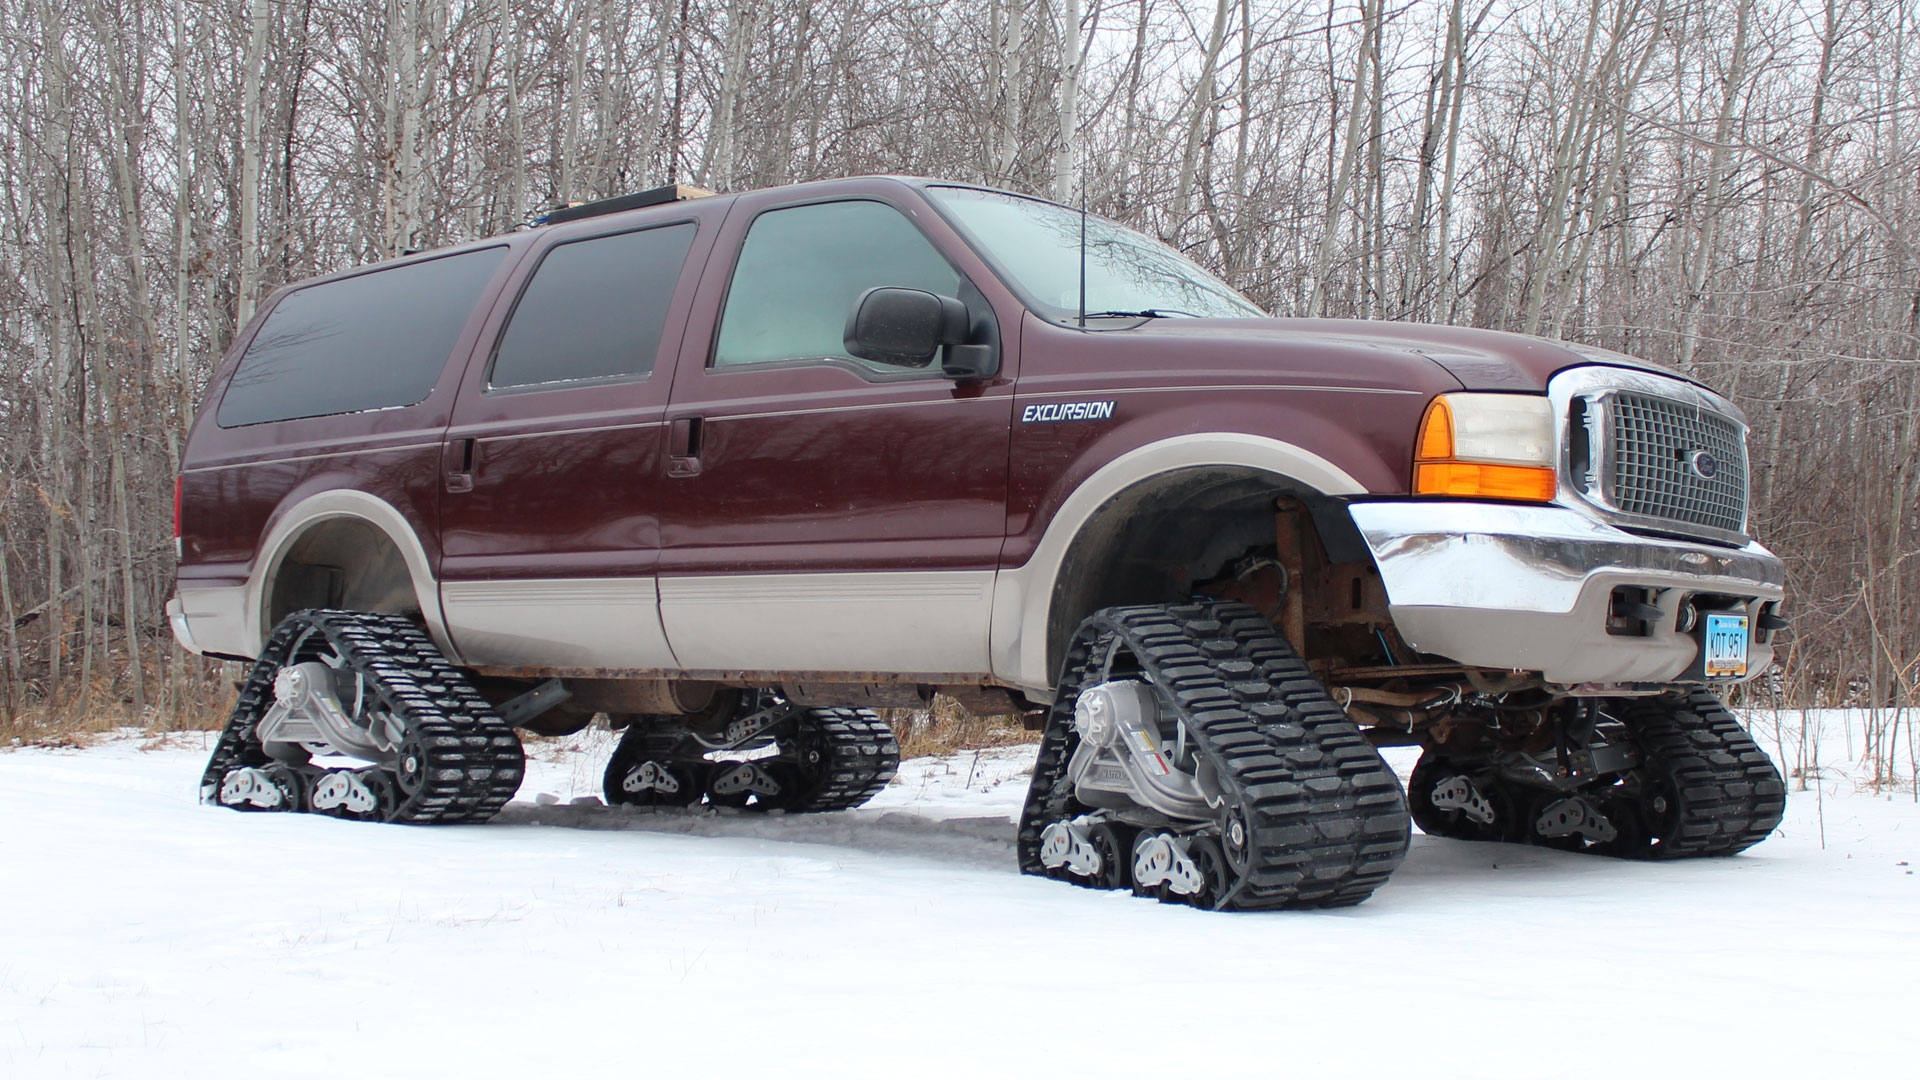 150 Tracks on a Ford Excursion